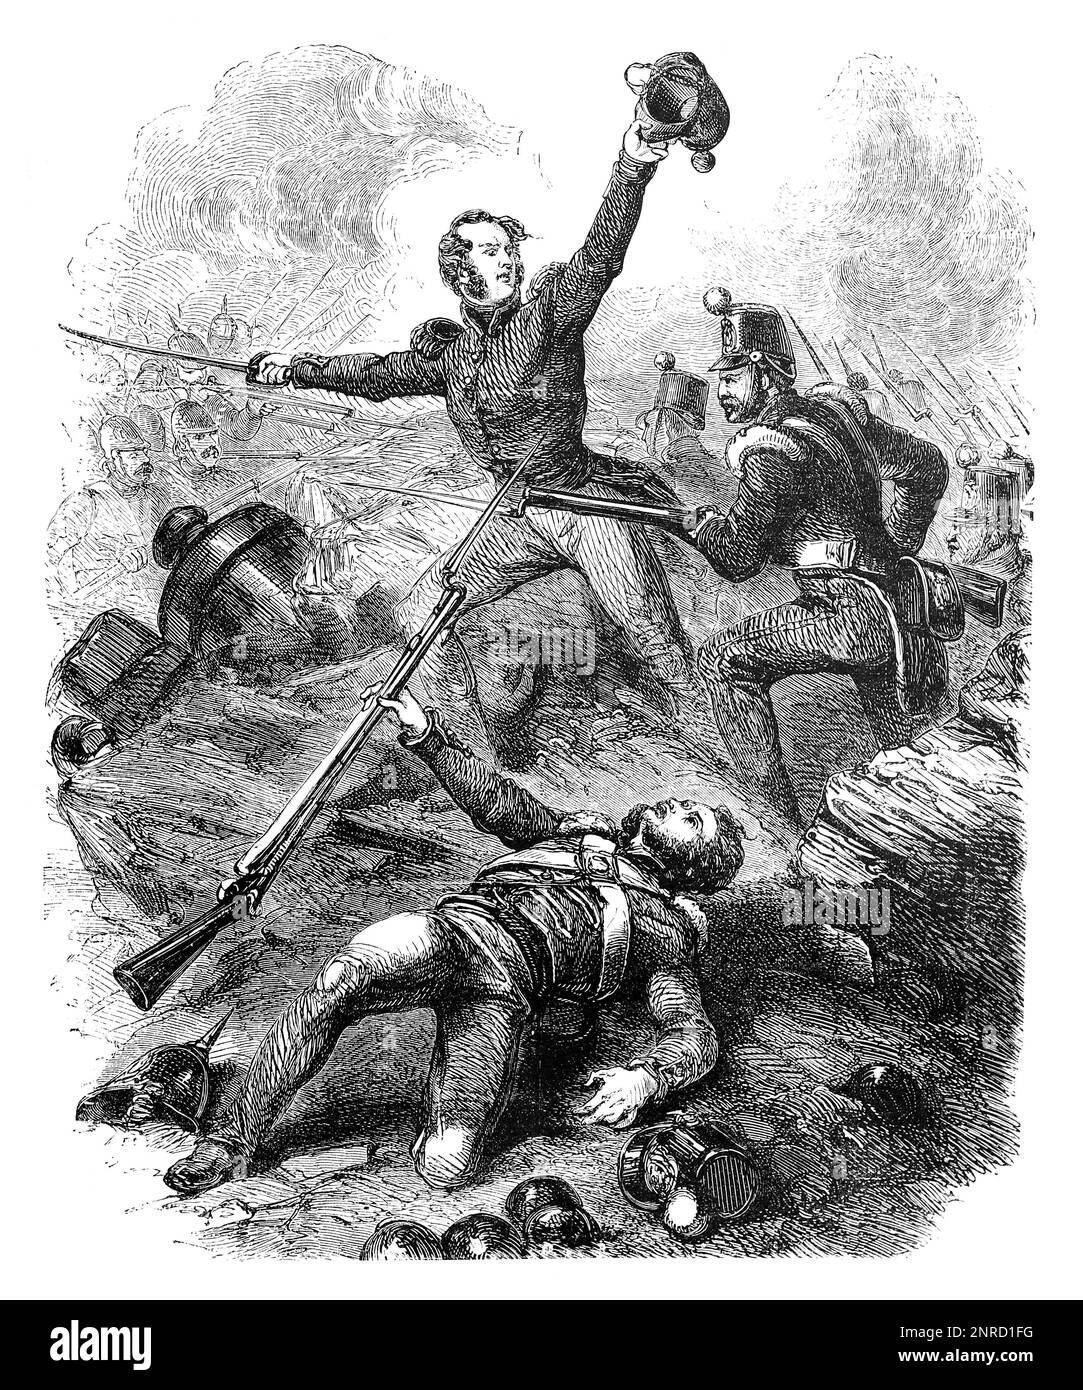 Acting Brigadier General  Charles Ash Windham (known as the Hero of the Redan) entering the Russian redan at the Battle of the Great Redan during the Siege of Sevastopol, Crimean War, September 1855. Black and White Illustration Stock Photo